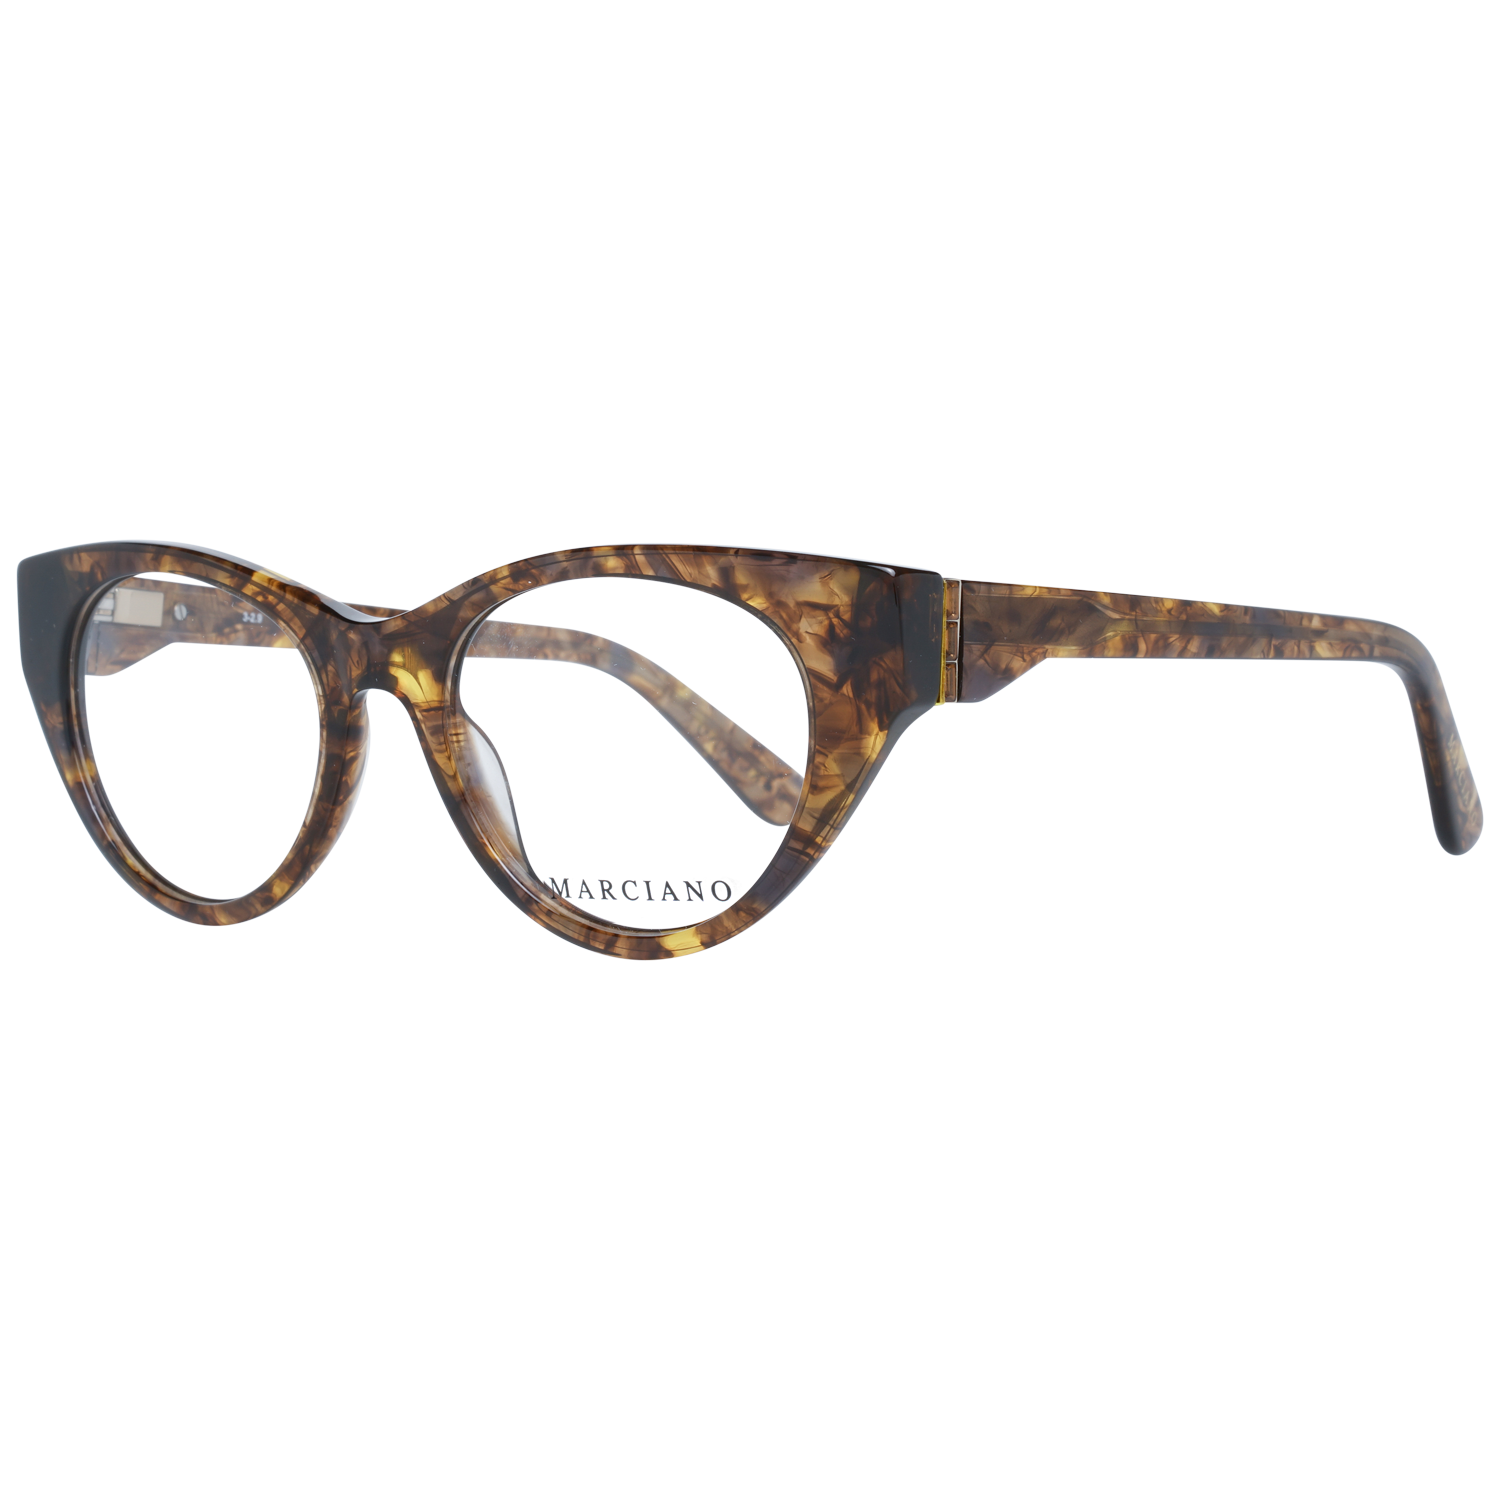 Marciano by Guess Frames Marciano by Guess Glasses Frames GM0362-S 050 49 Eyeglasses Eyewear UK USA Australia 